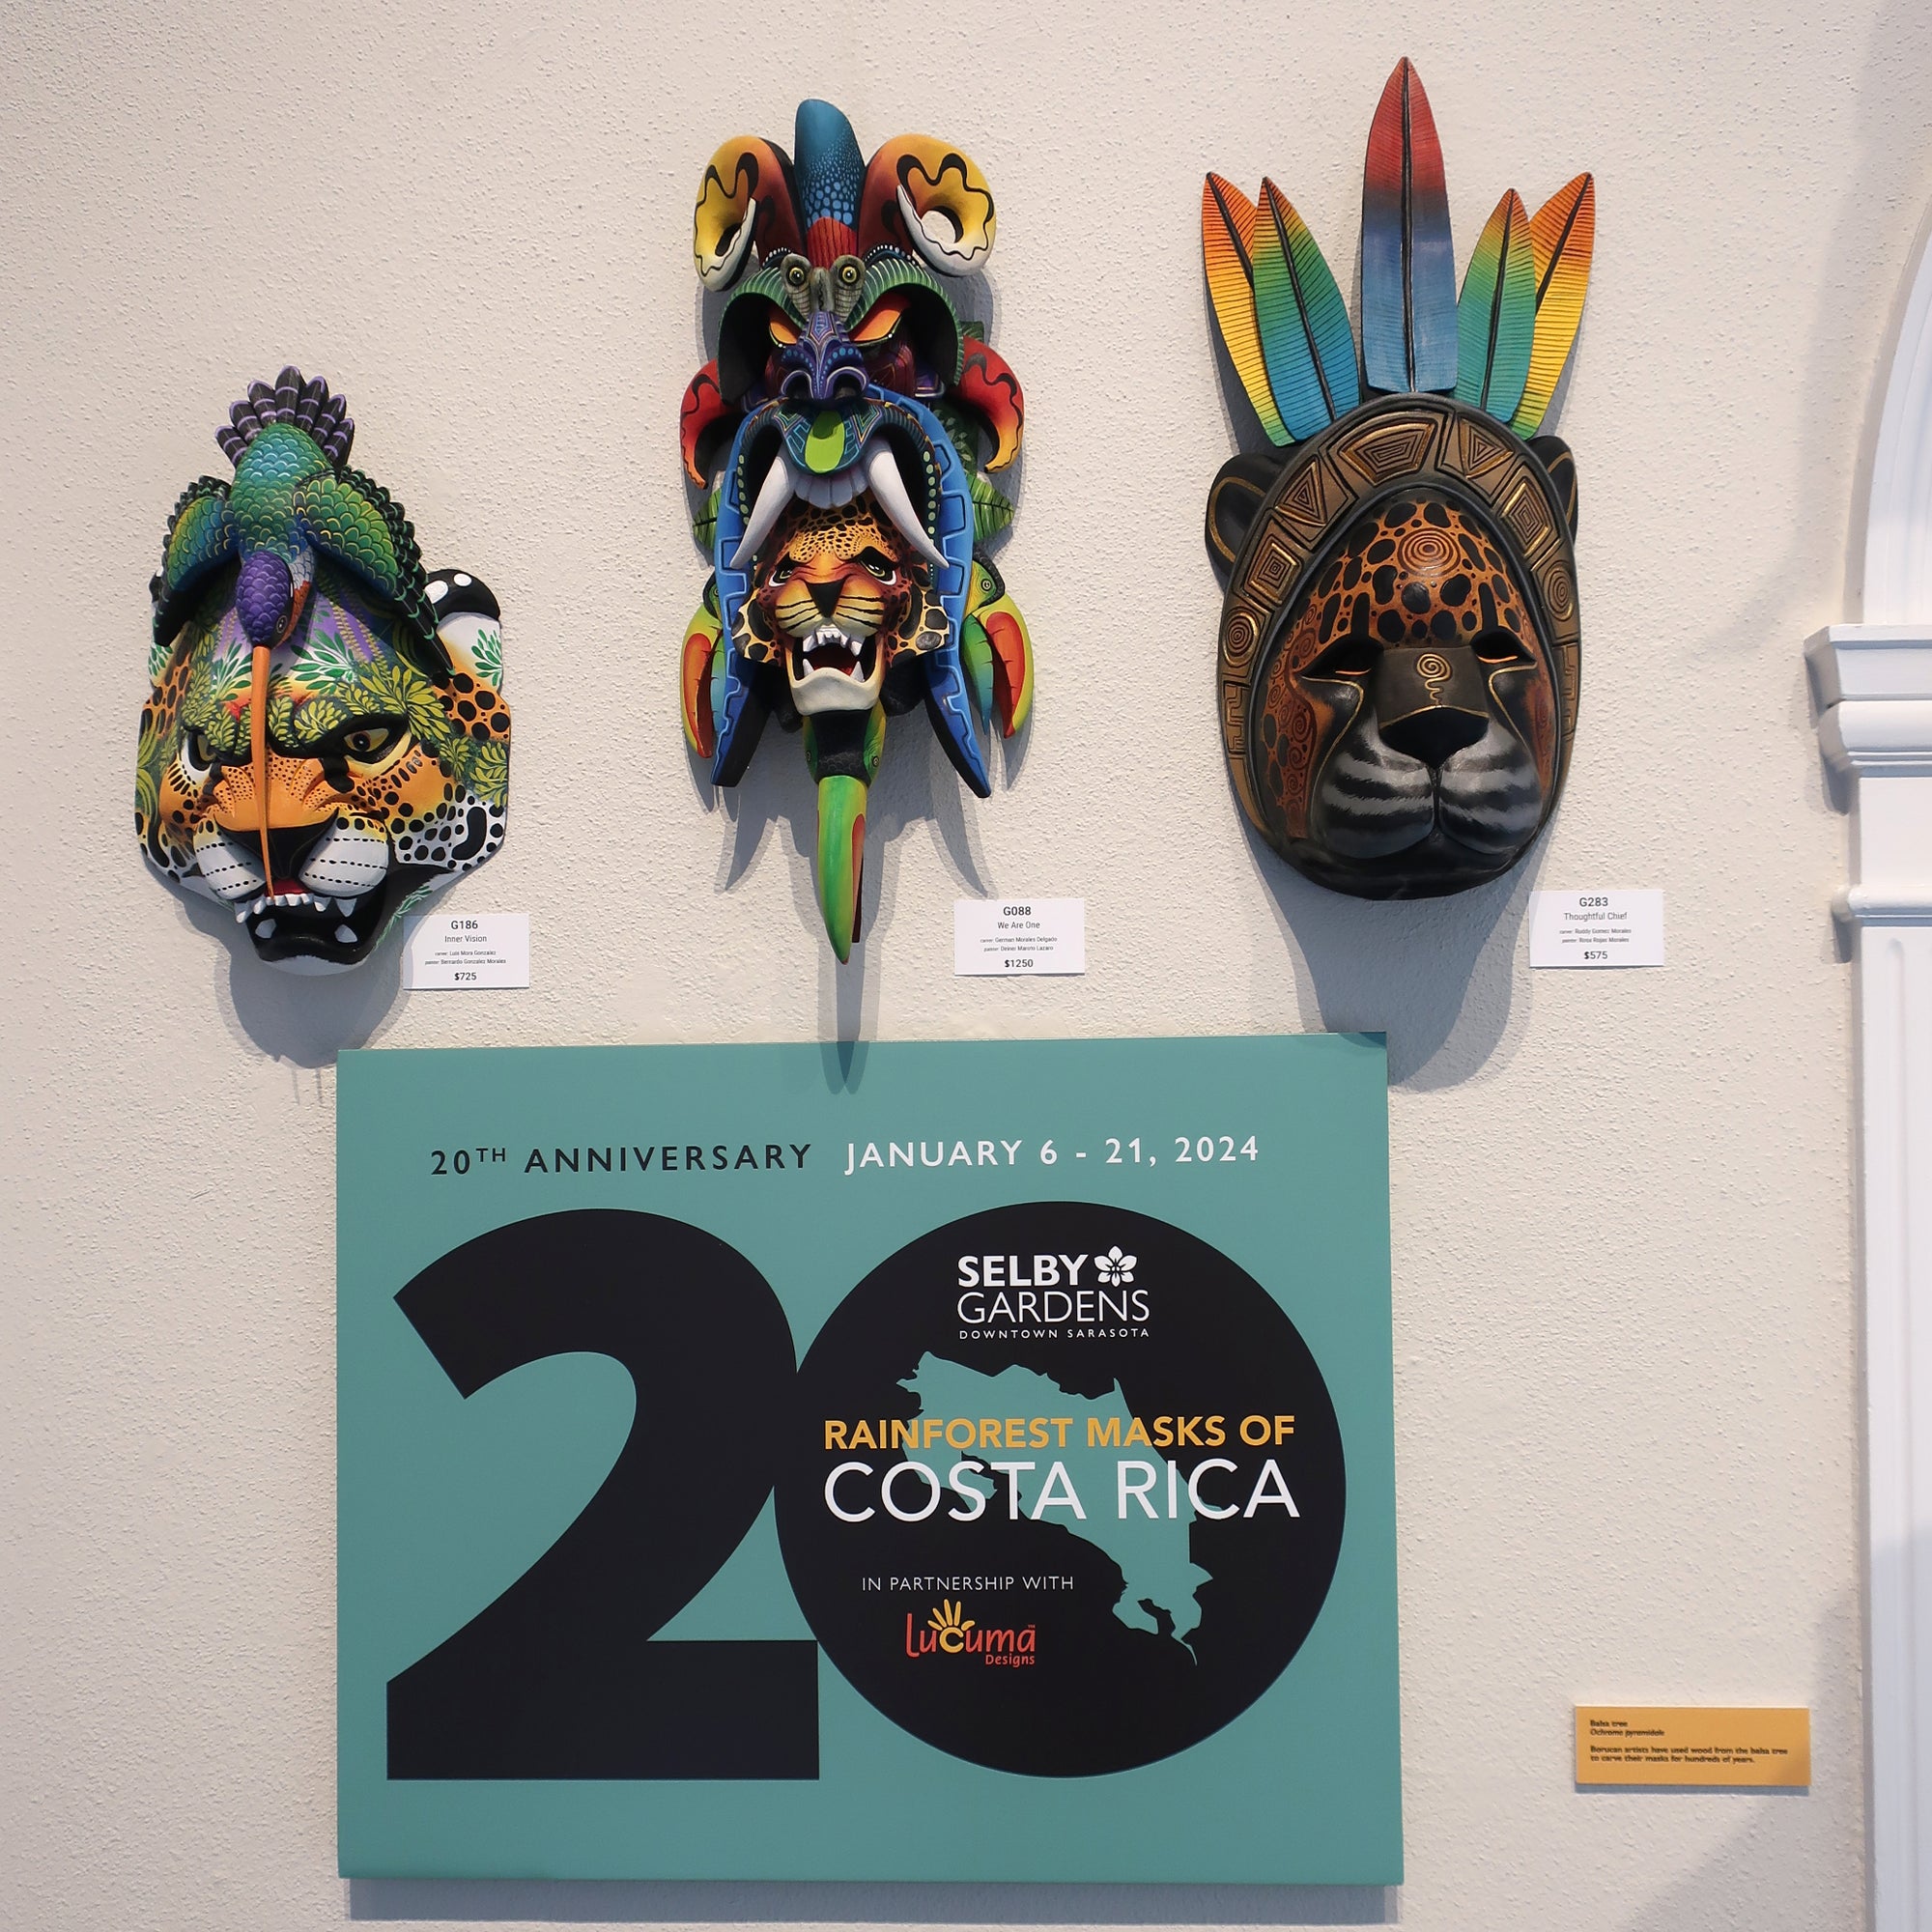 Borucan Rainforest Masks delight and touch hearts for 20 years!